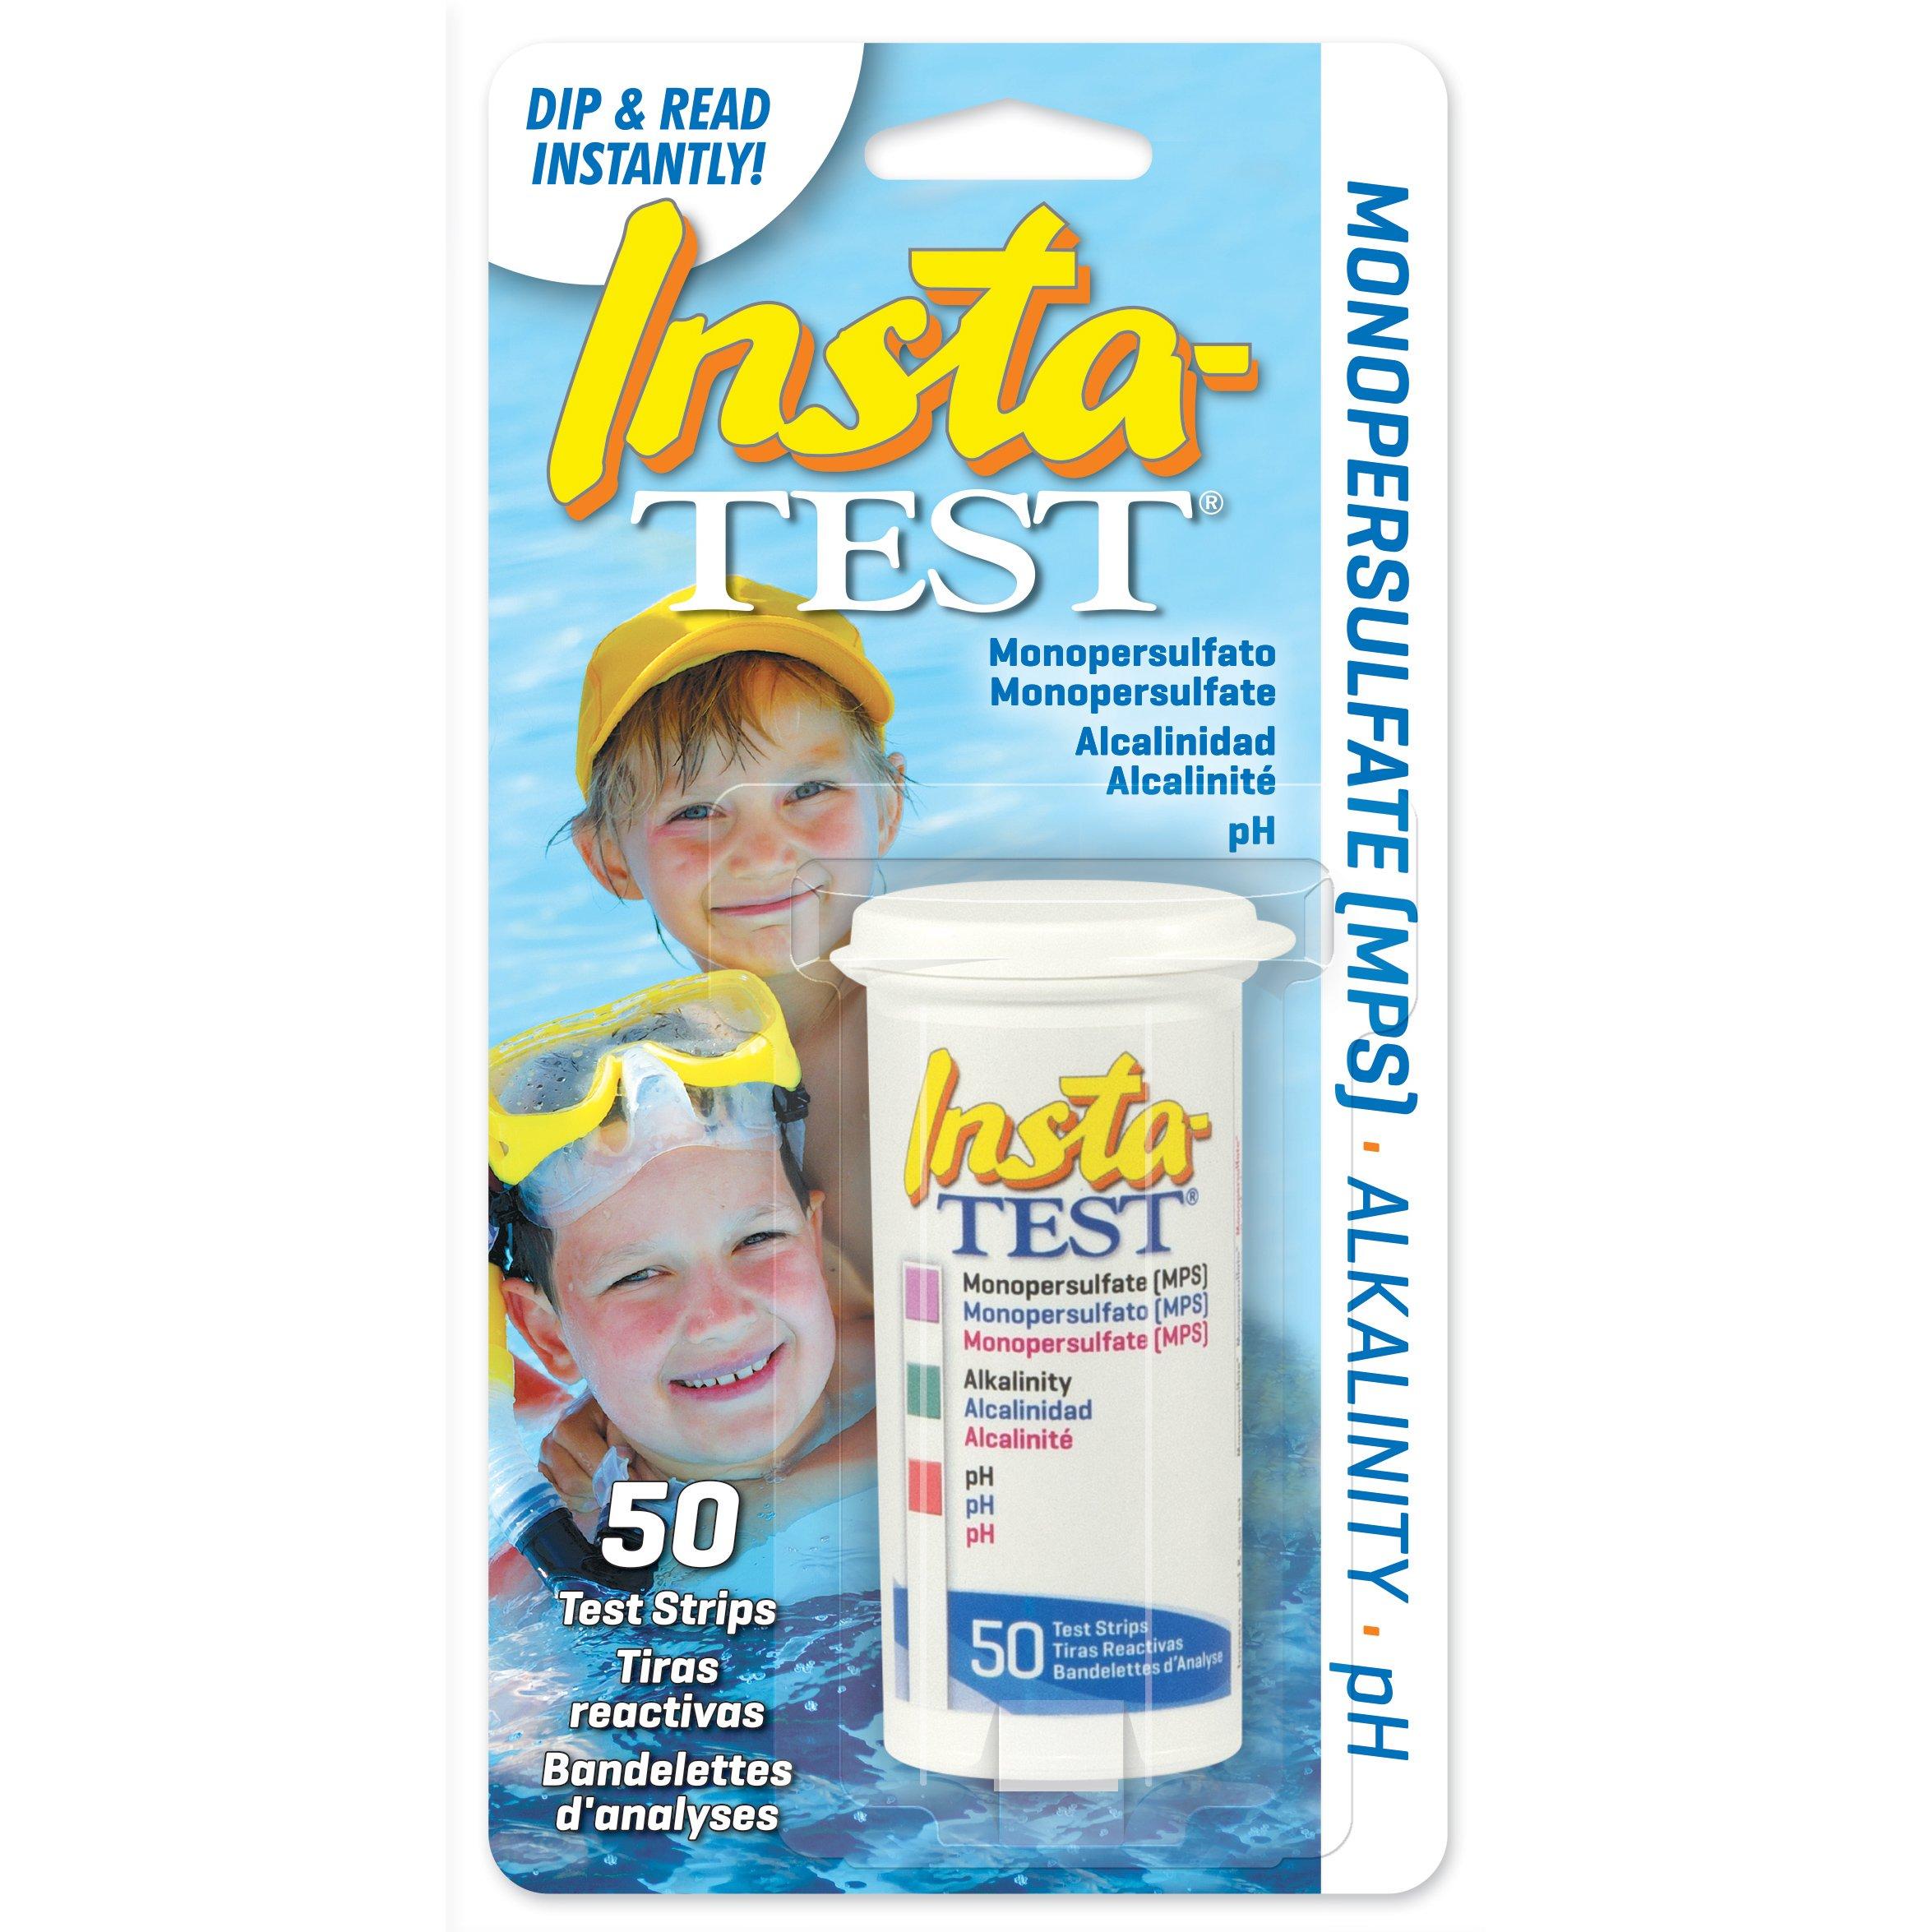 LaMotte  Insta-TEST MPS 3-Way Test Strips 50-Count